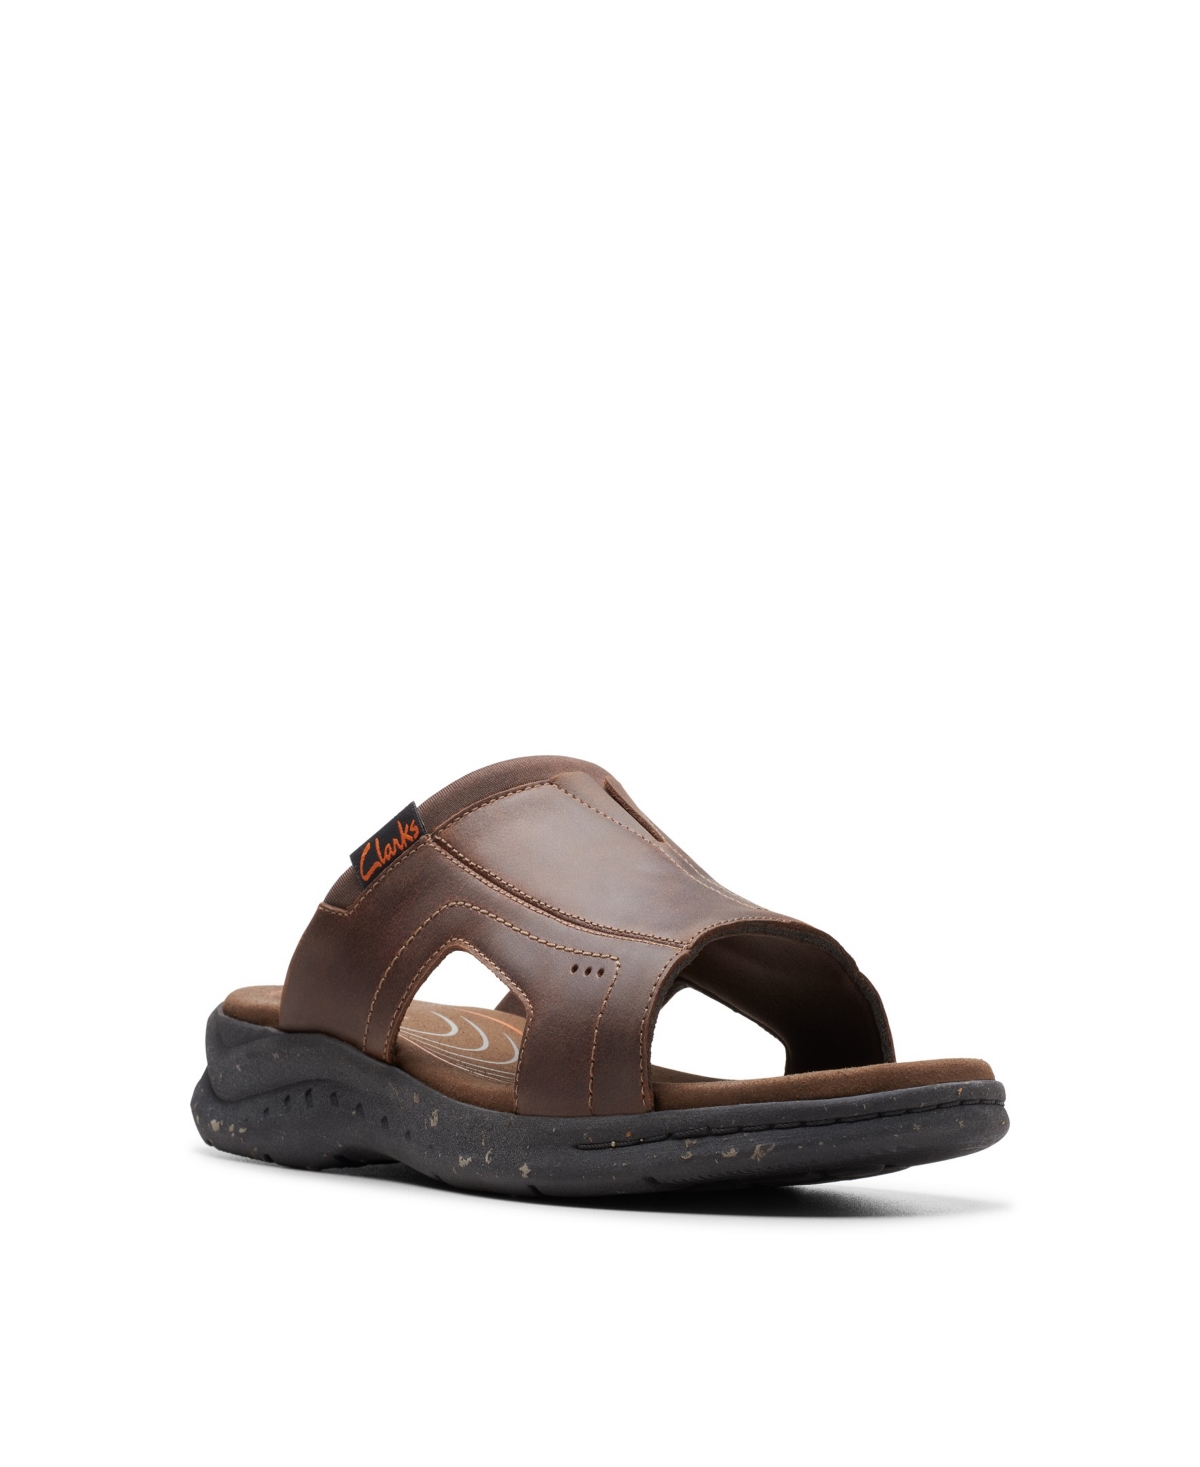 Collection Men's Walkford Band Sandals - Black Leather